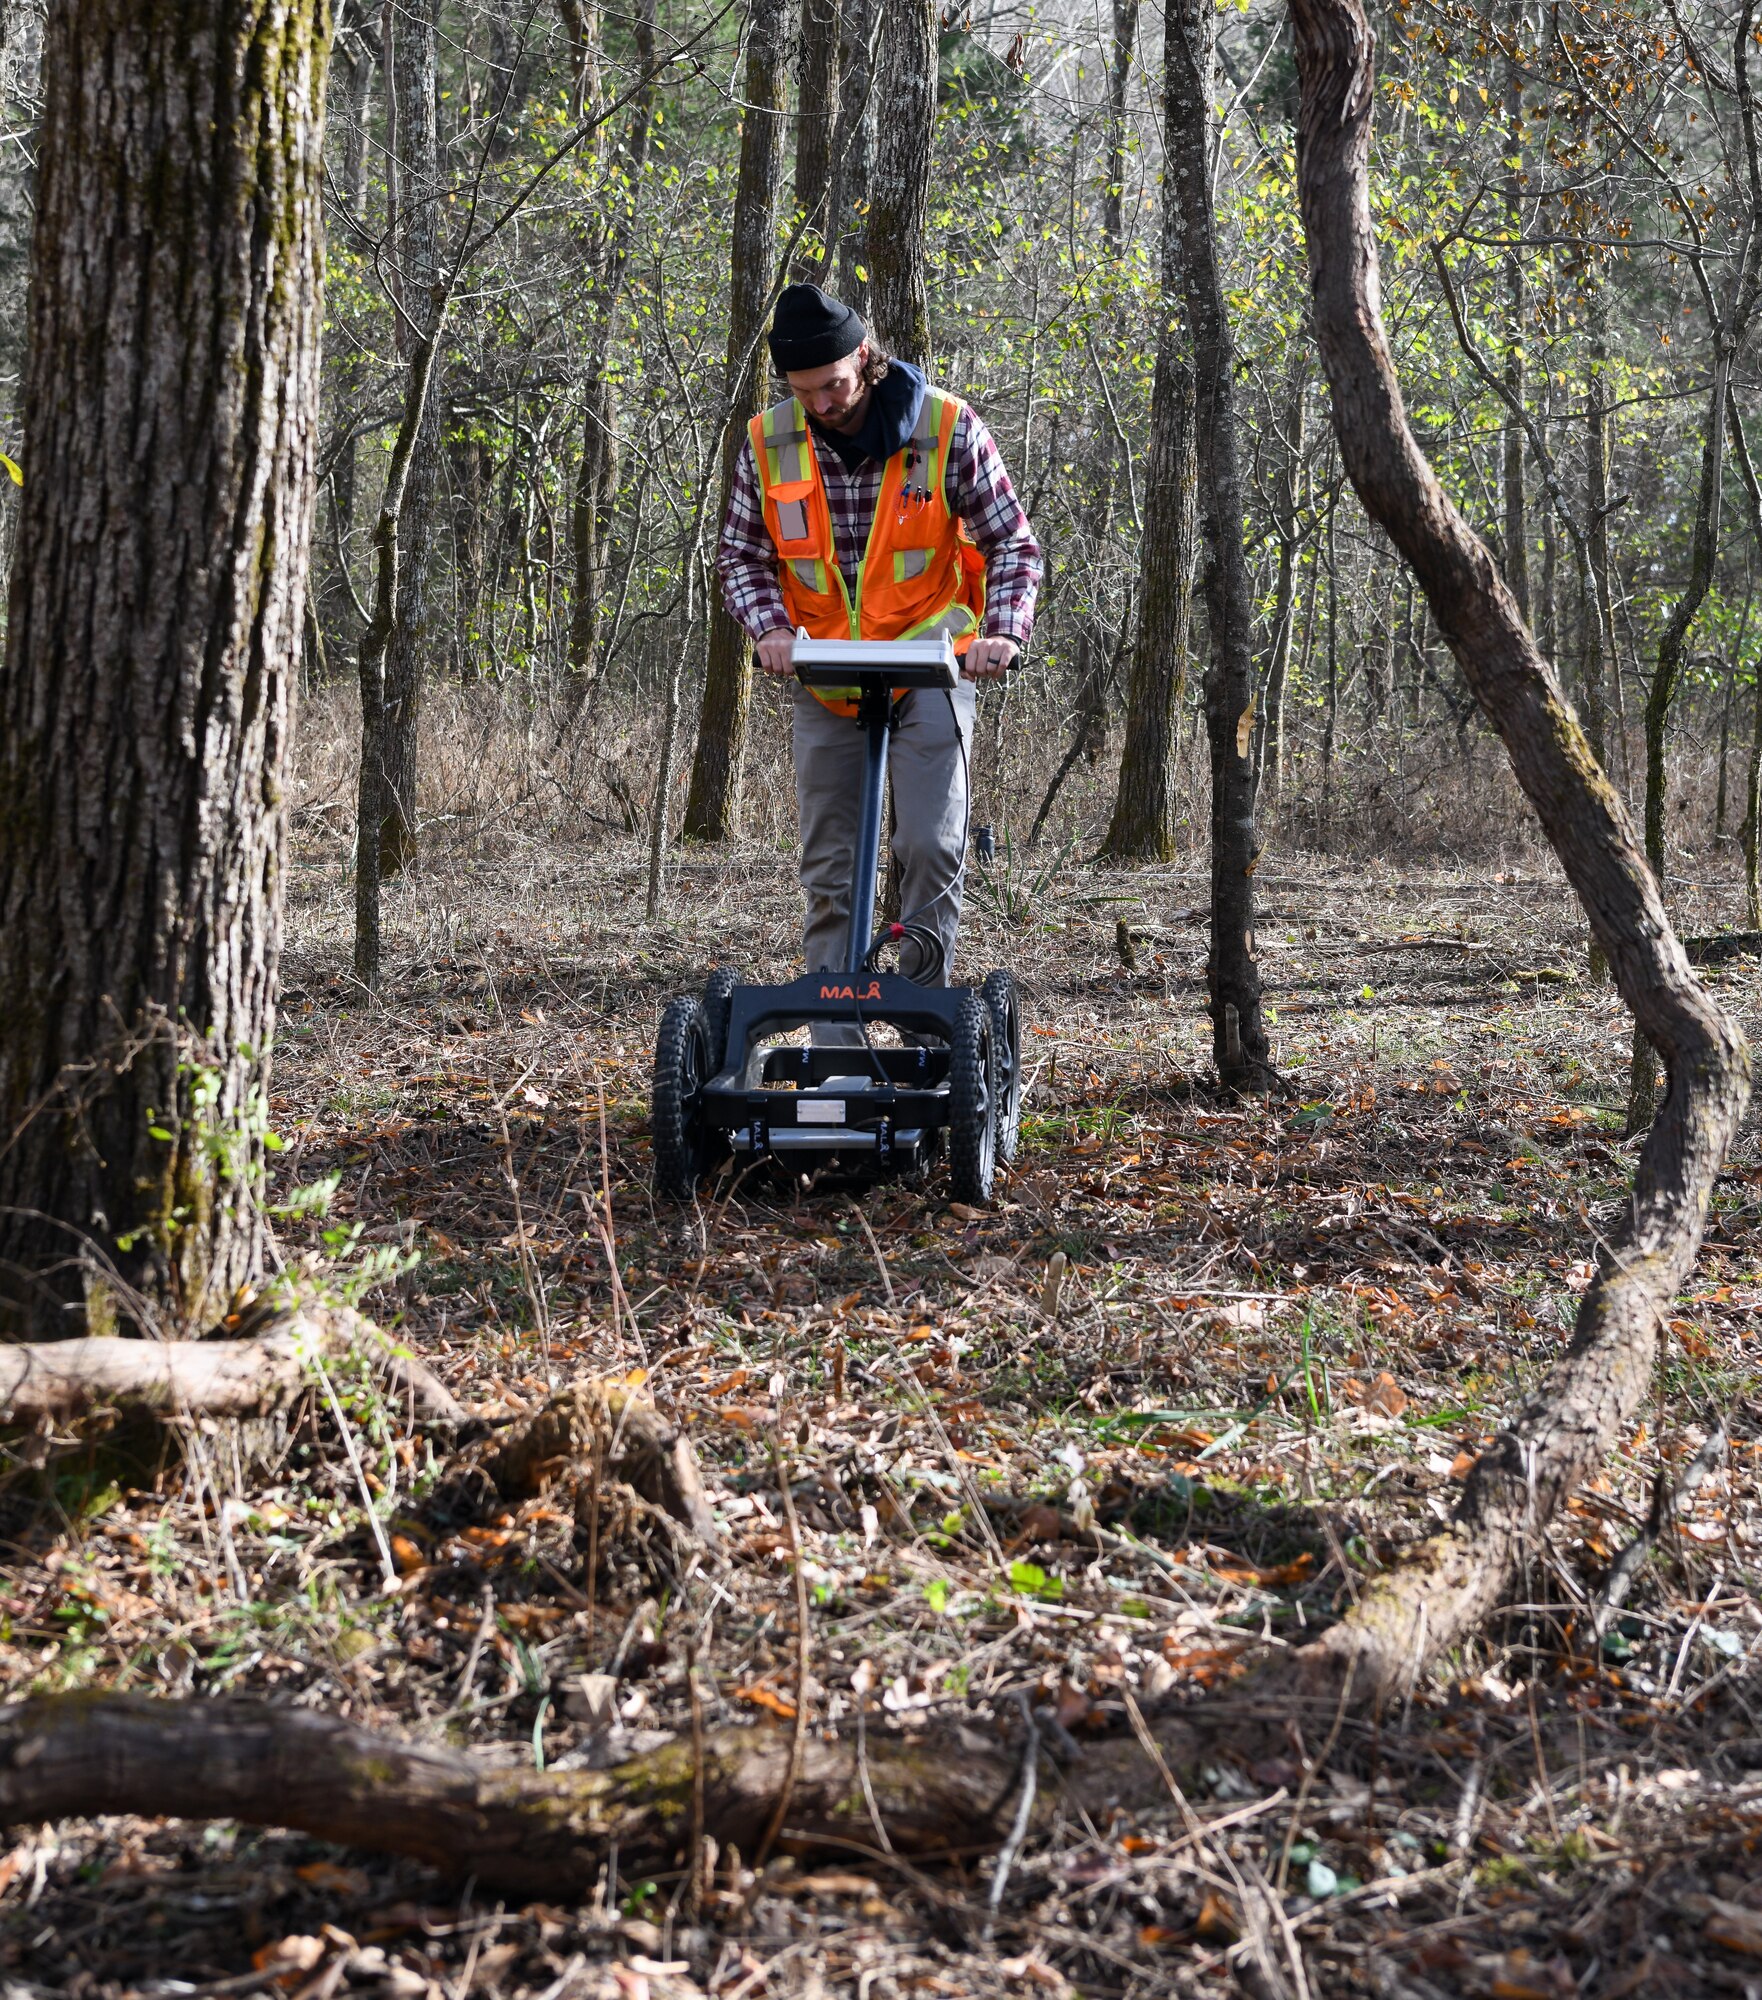 Jacob Jepsen, an archaeologist who specializes in geophysics, operates a ground penetrating radar machine in Rutherford-Shipley Cemetery at Arnold Air Force Base, Tennessee, Nov. 10, 2022. The GPR data gives archaeologists information about what has occurred below the surface to help detect possible grave locations. (U.S. Air Force photo by Jill Pickett) (This image has been altered by obscuring a badge for security purposes.)